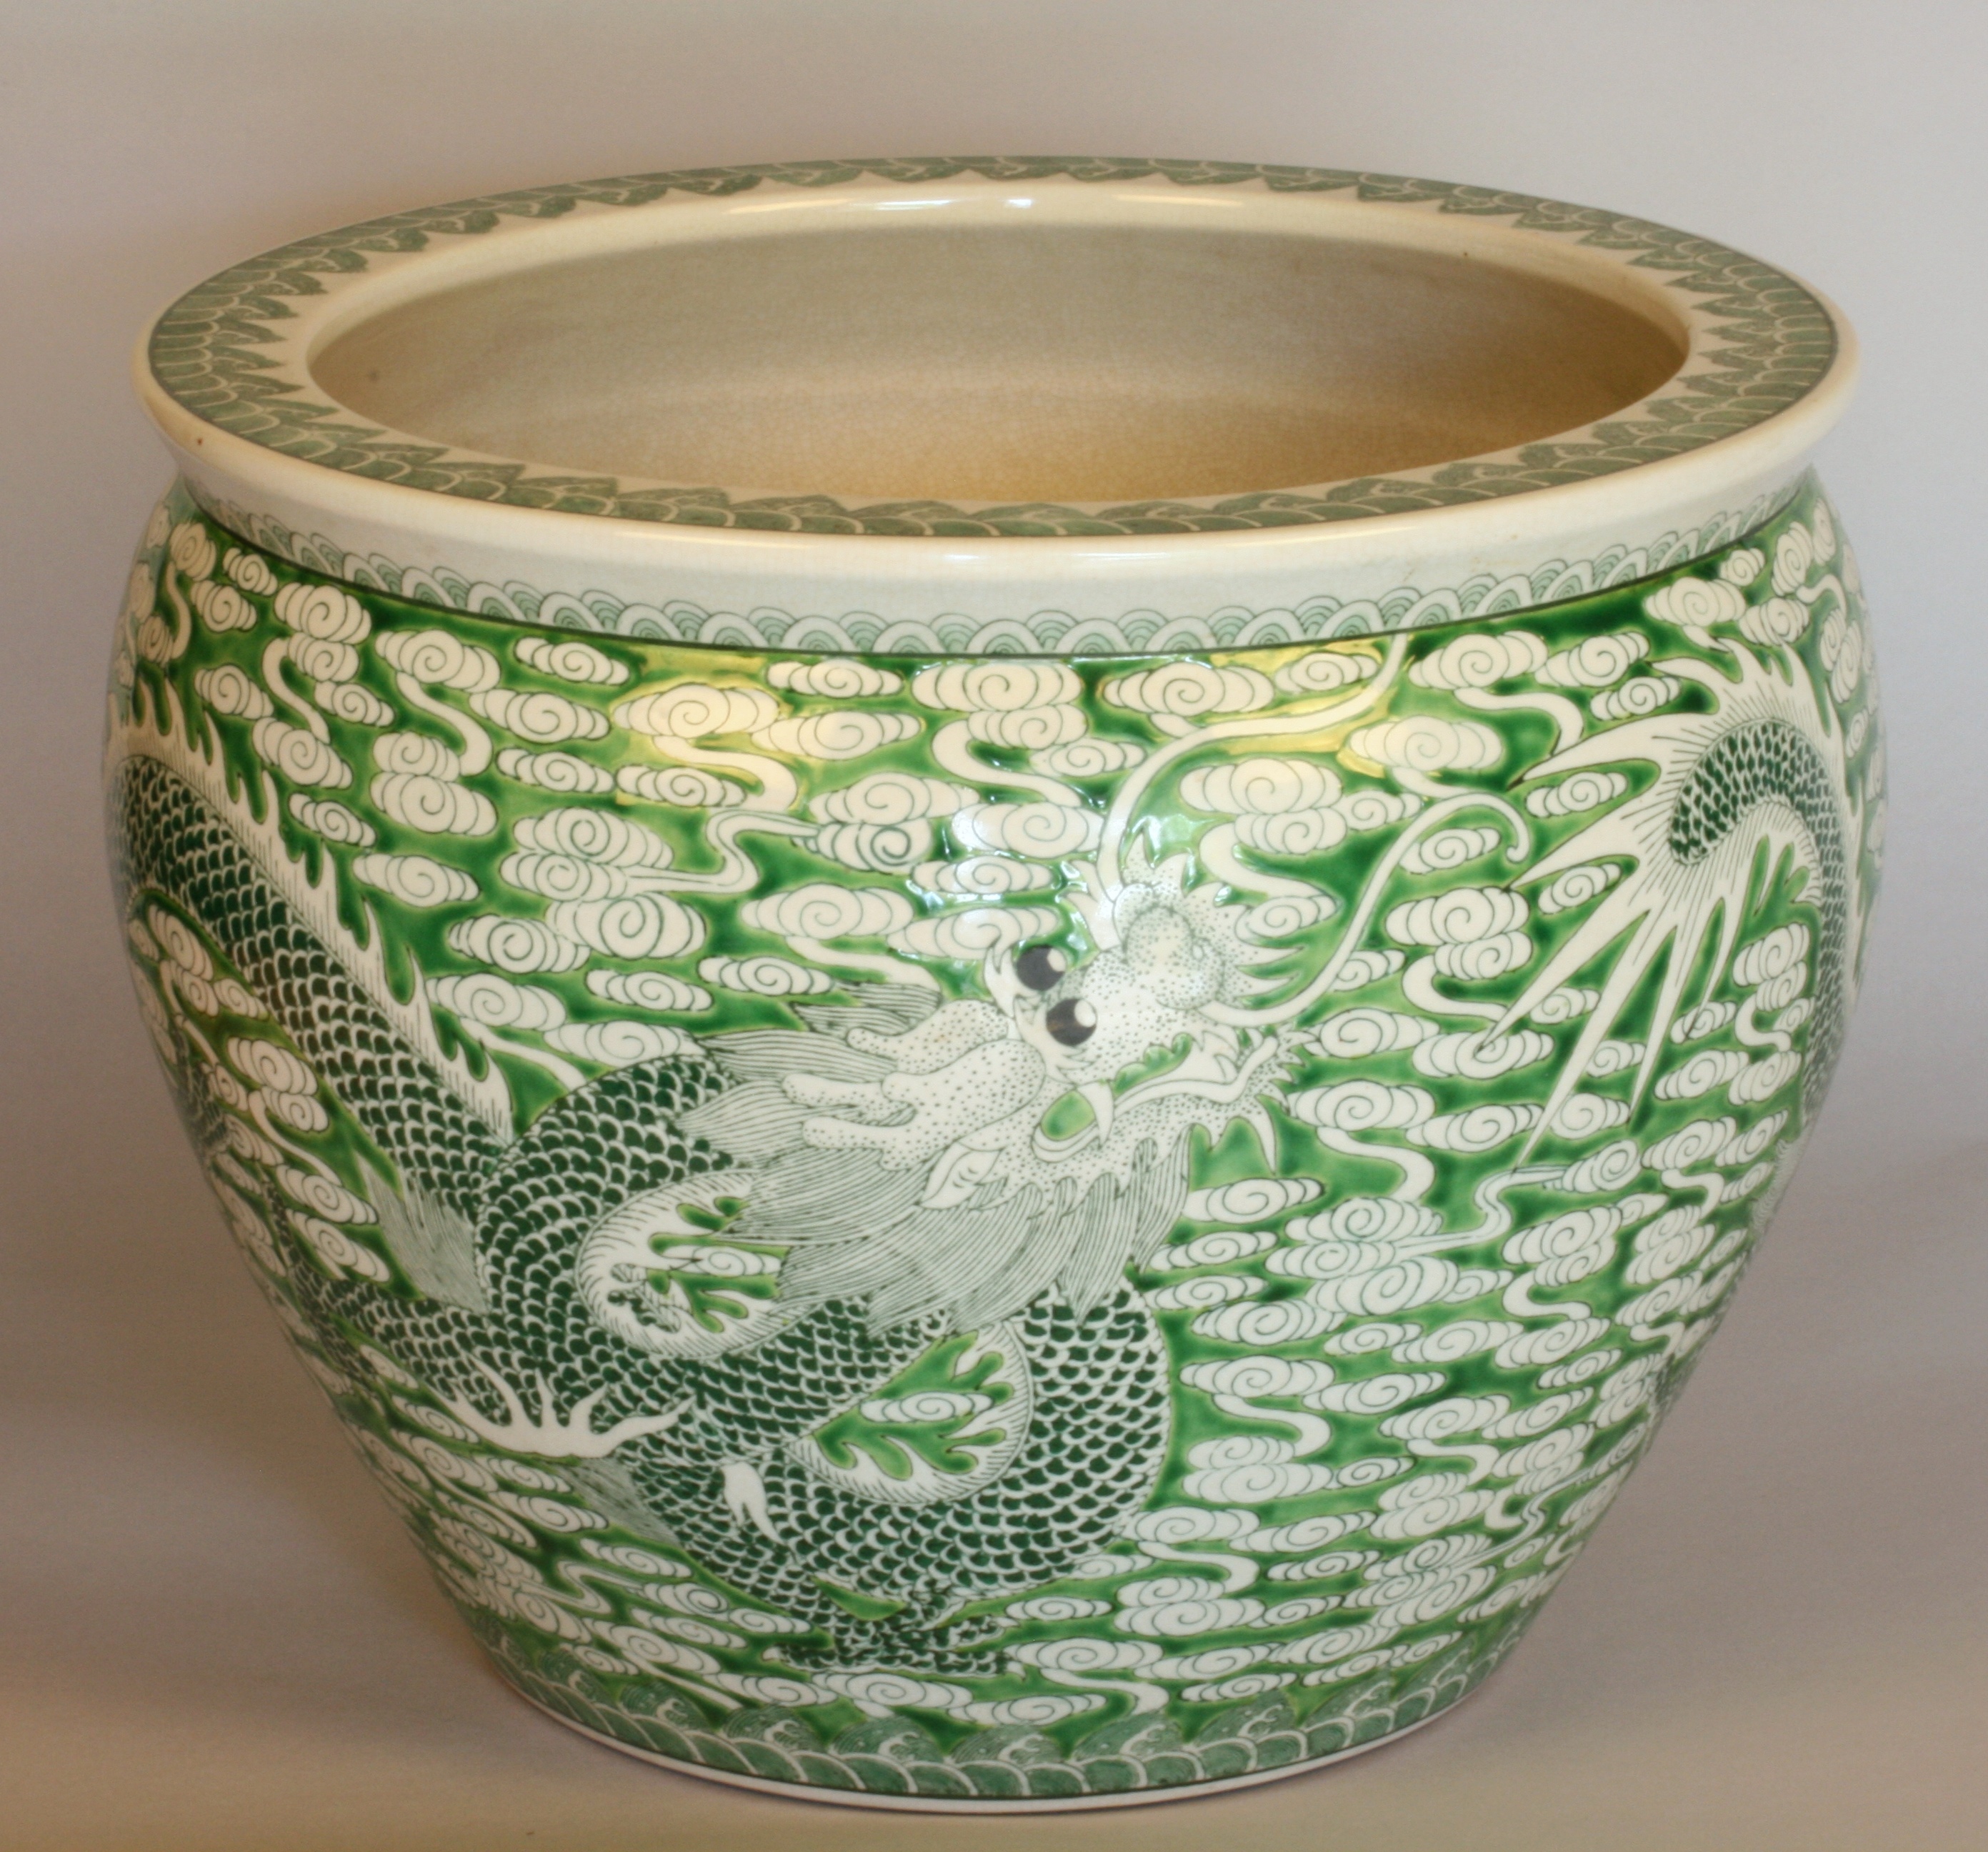 A Chinese Carp Bowl. Youngzou Circa 1880. Decorated in green with a Dragon. The interior with